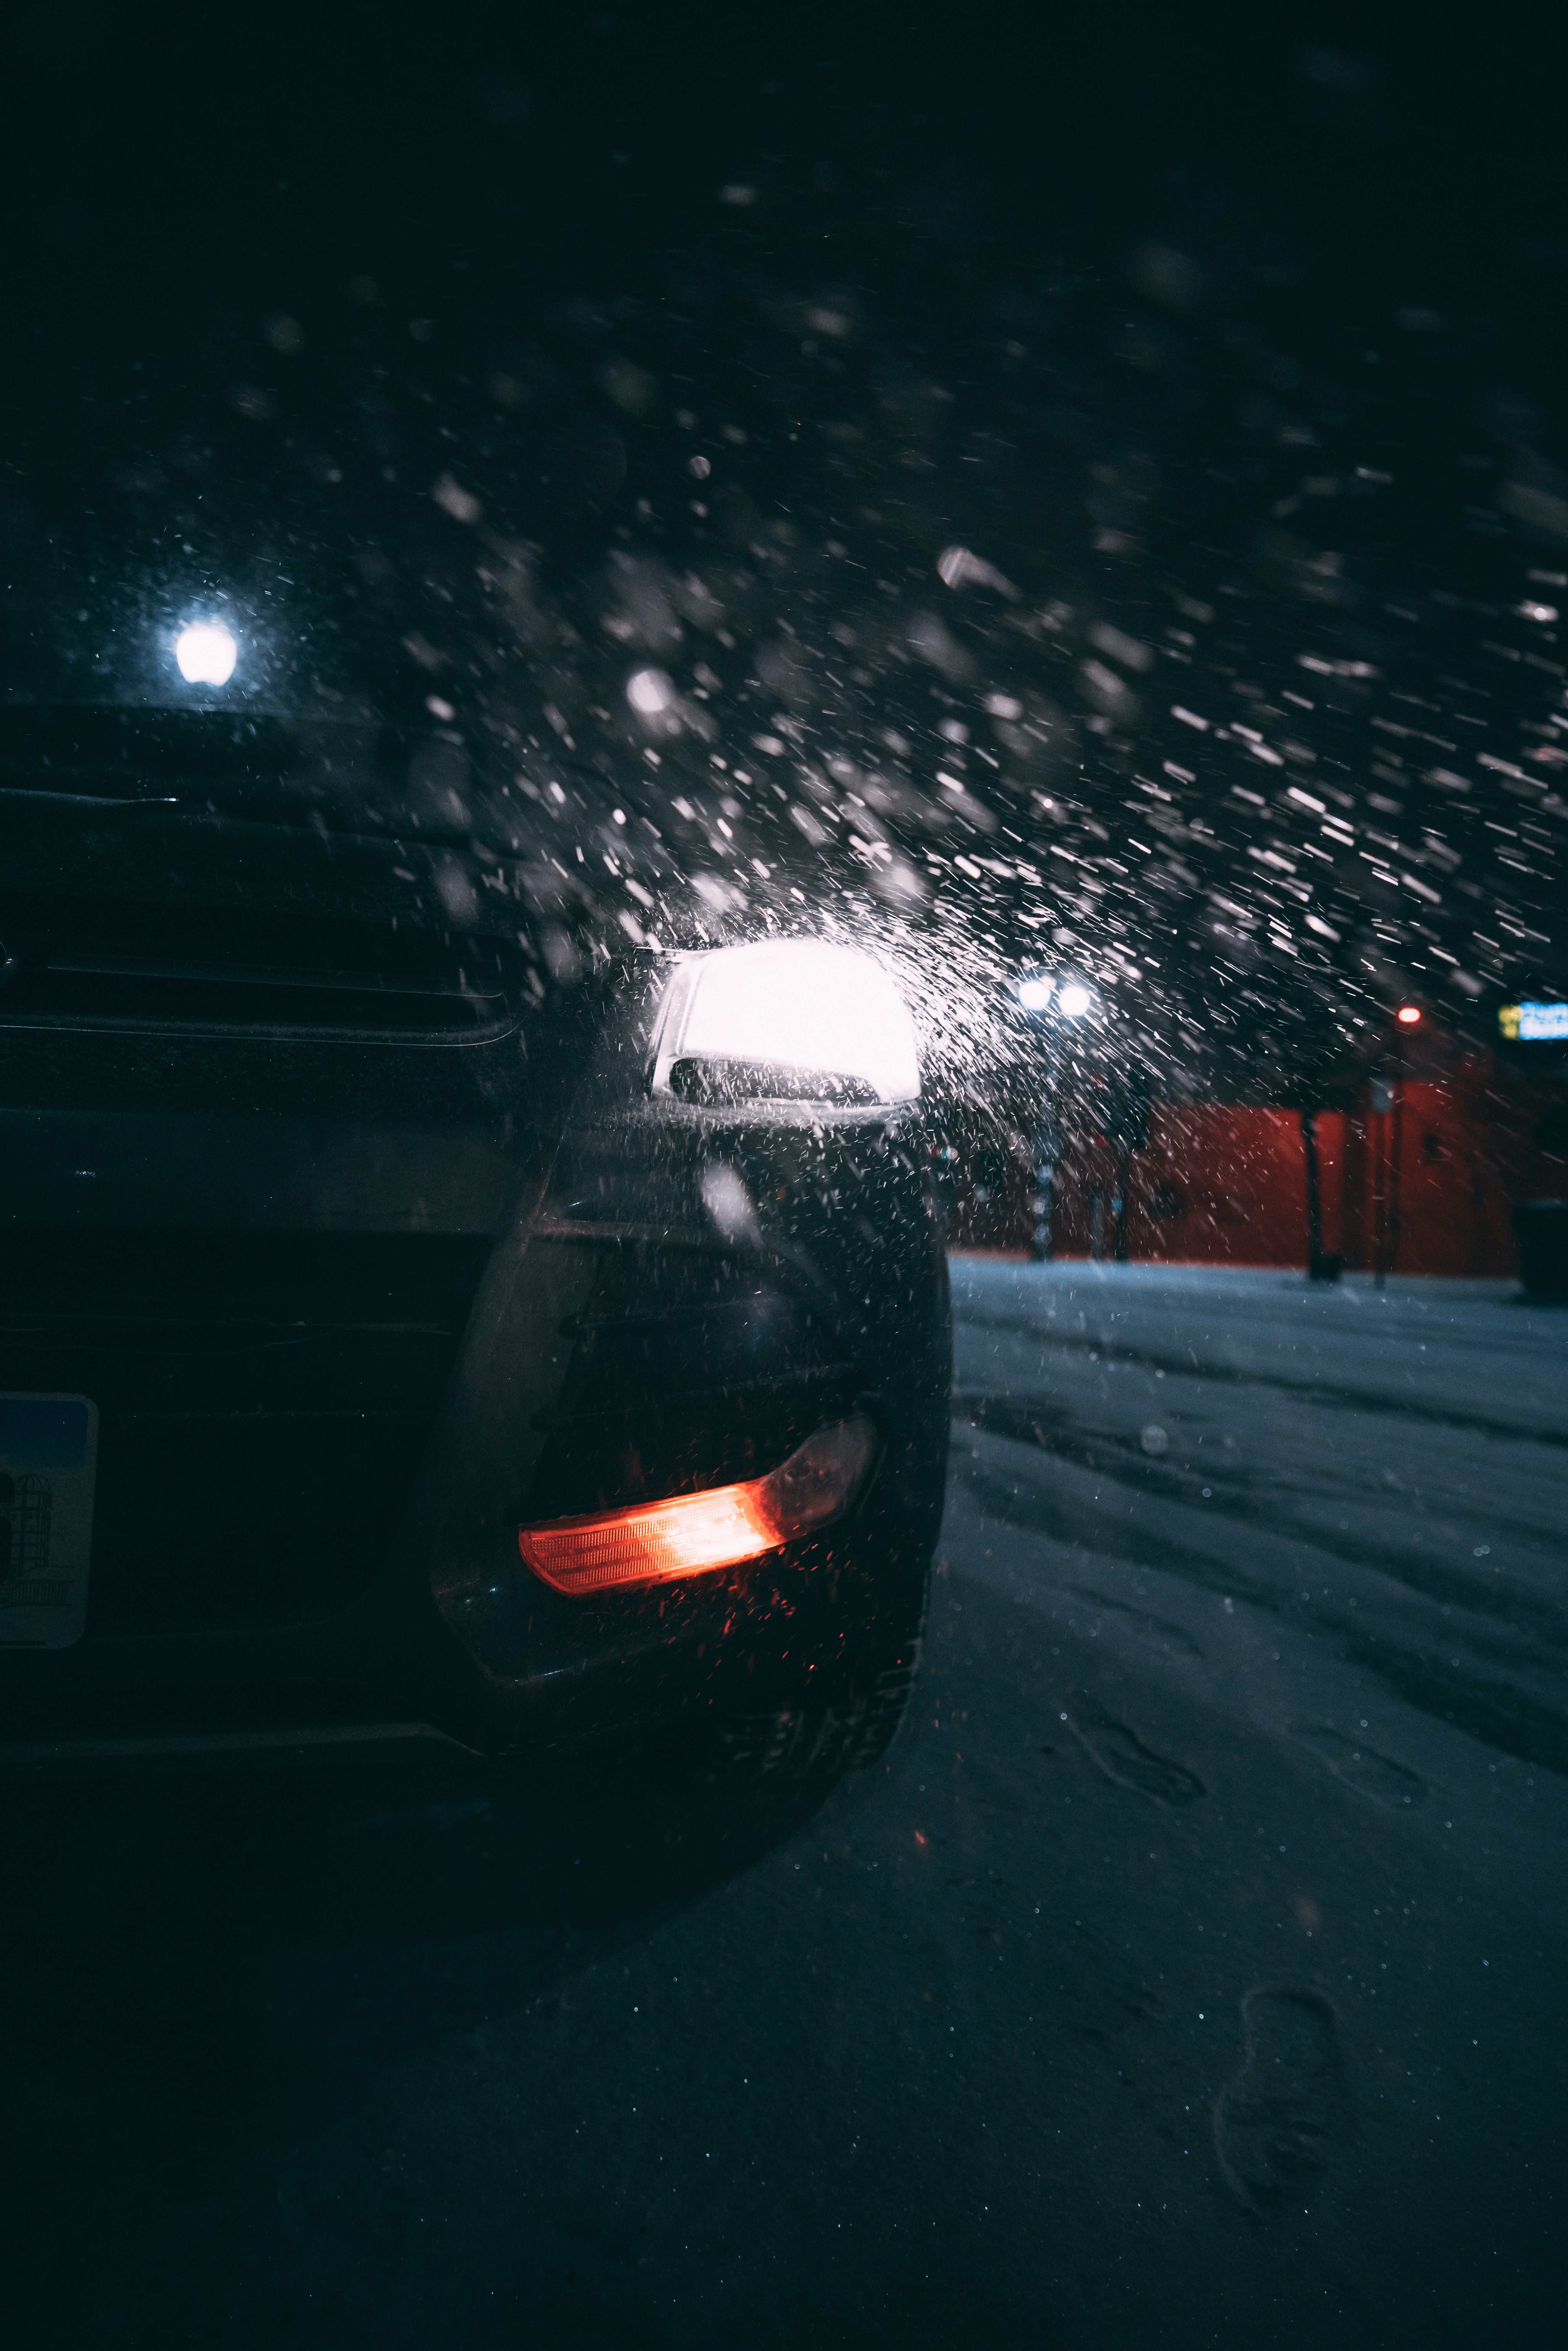 1920x1080 Background night, snow, cars, lights, car, back view, rear view, headlights